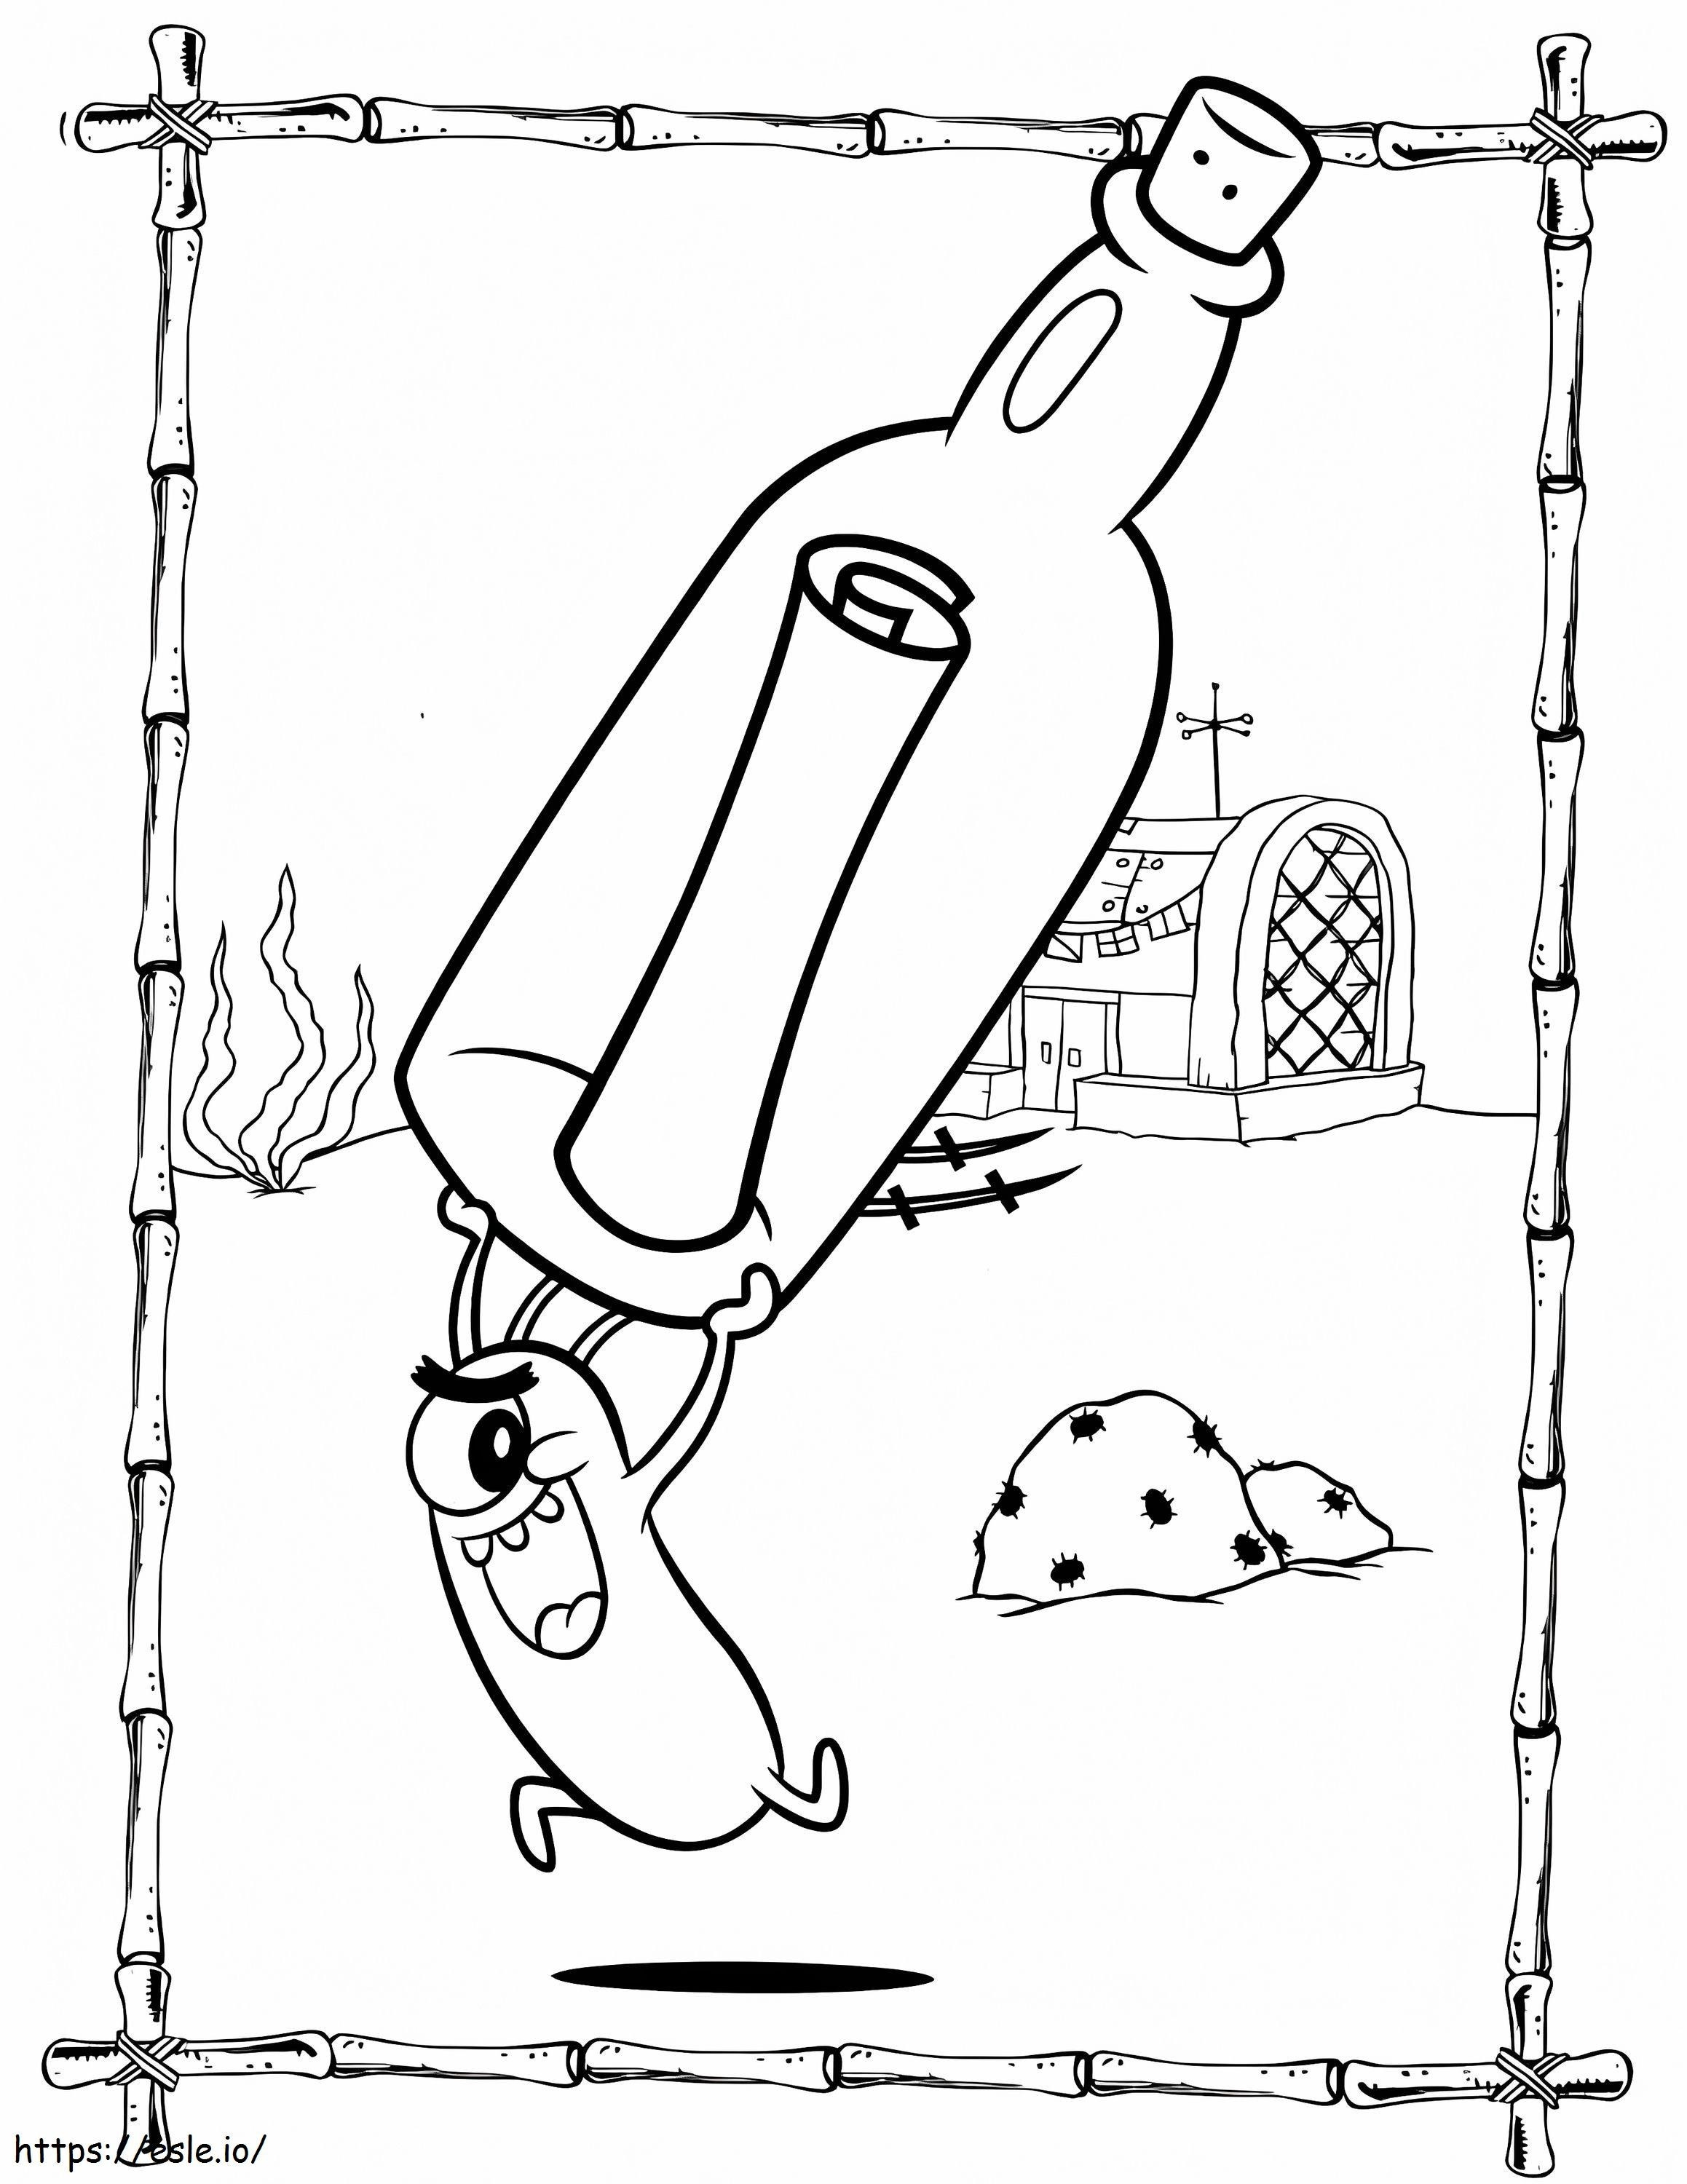 Plankton And Bottle coloring page